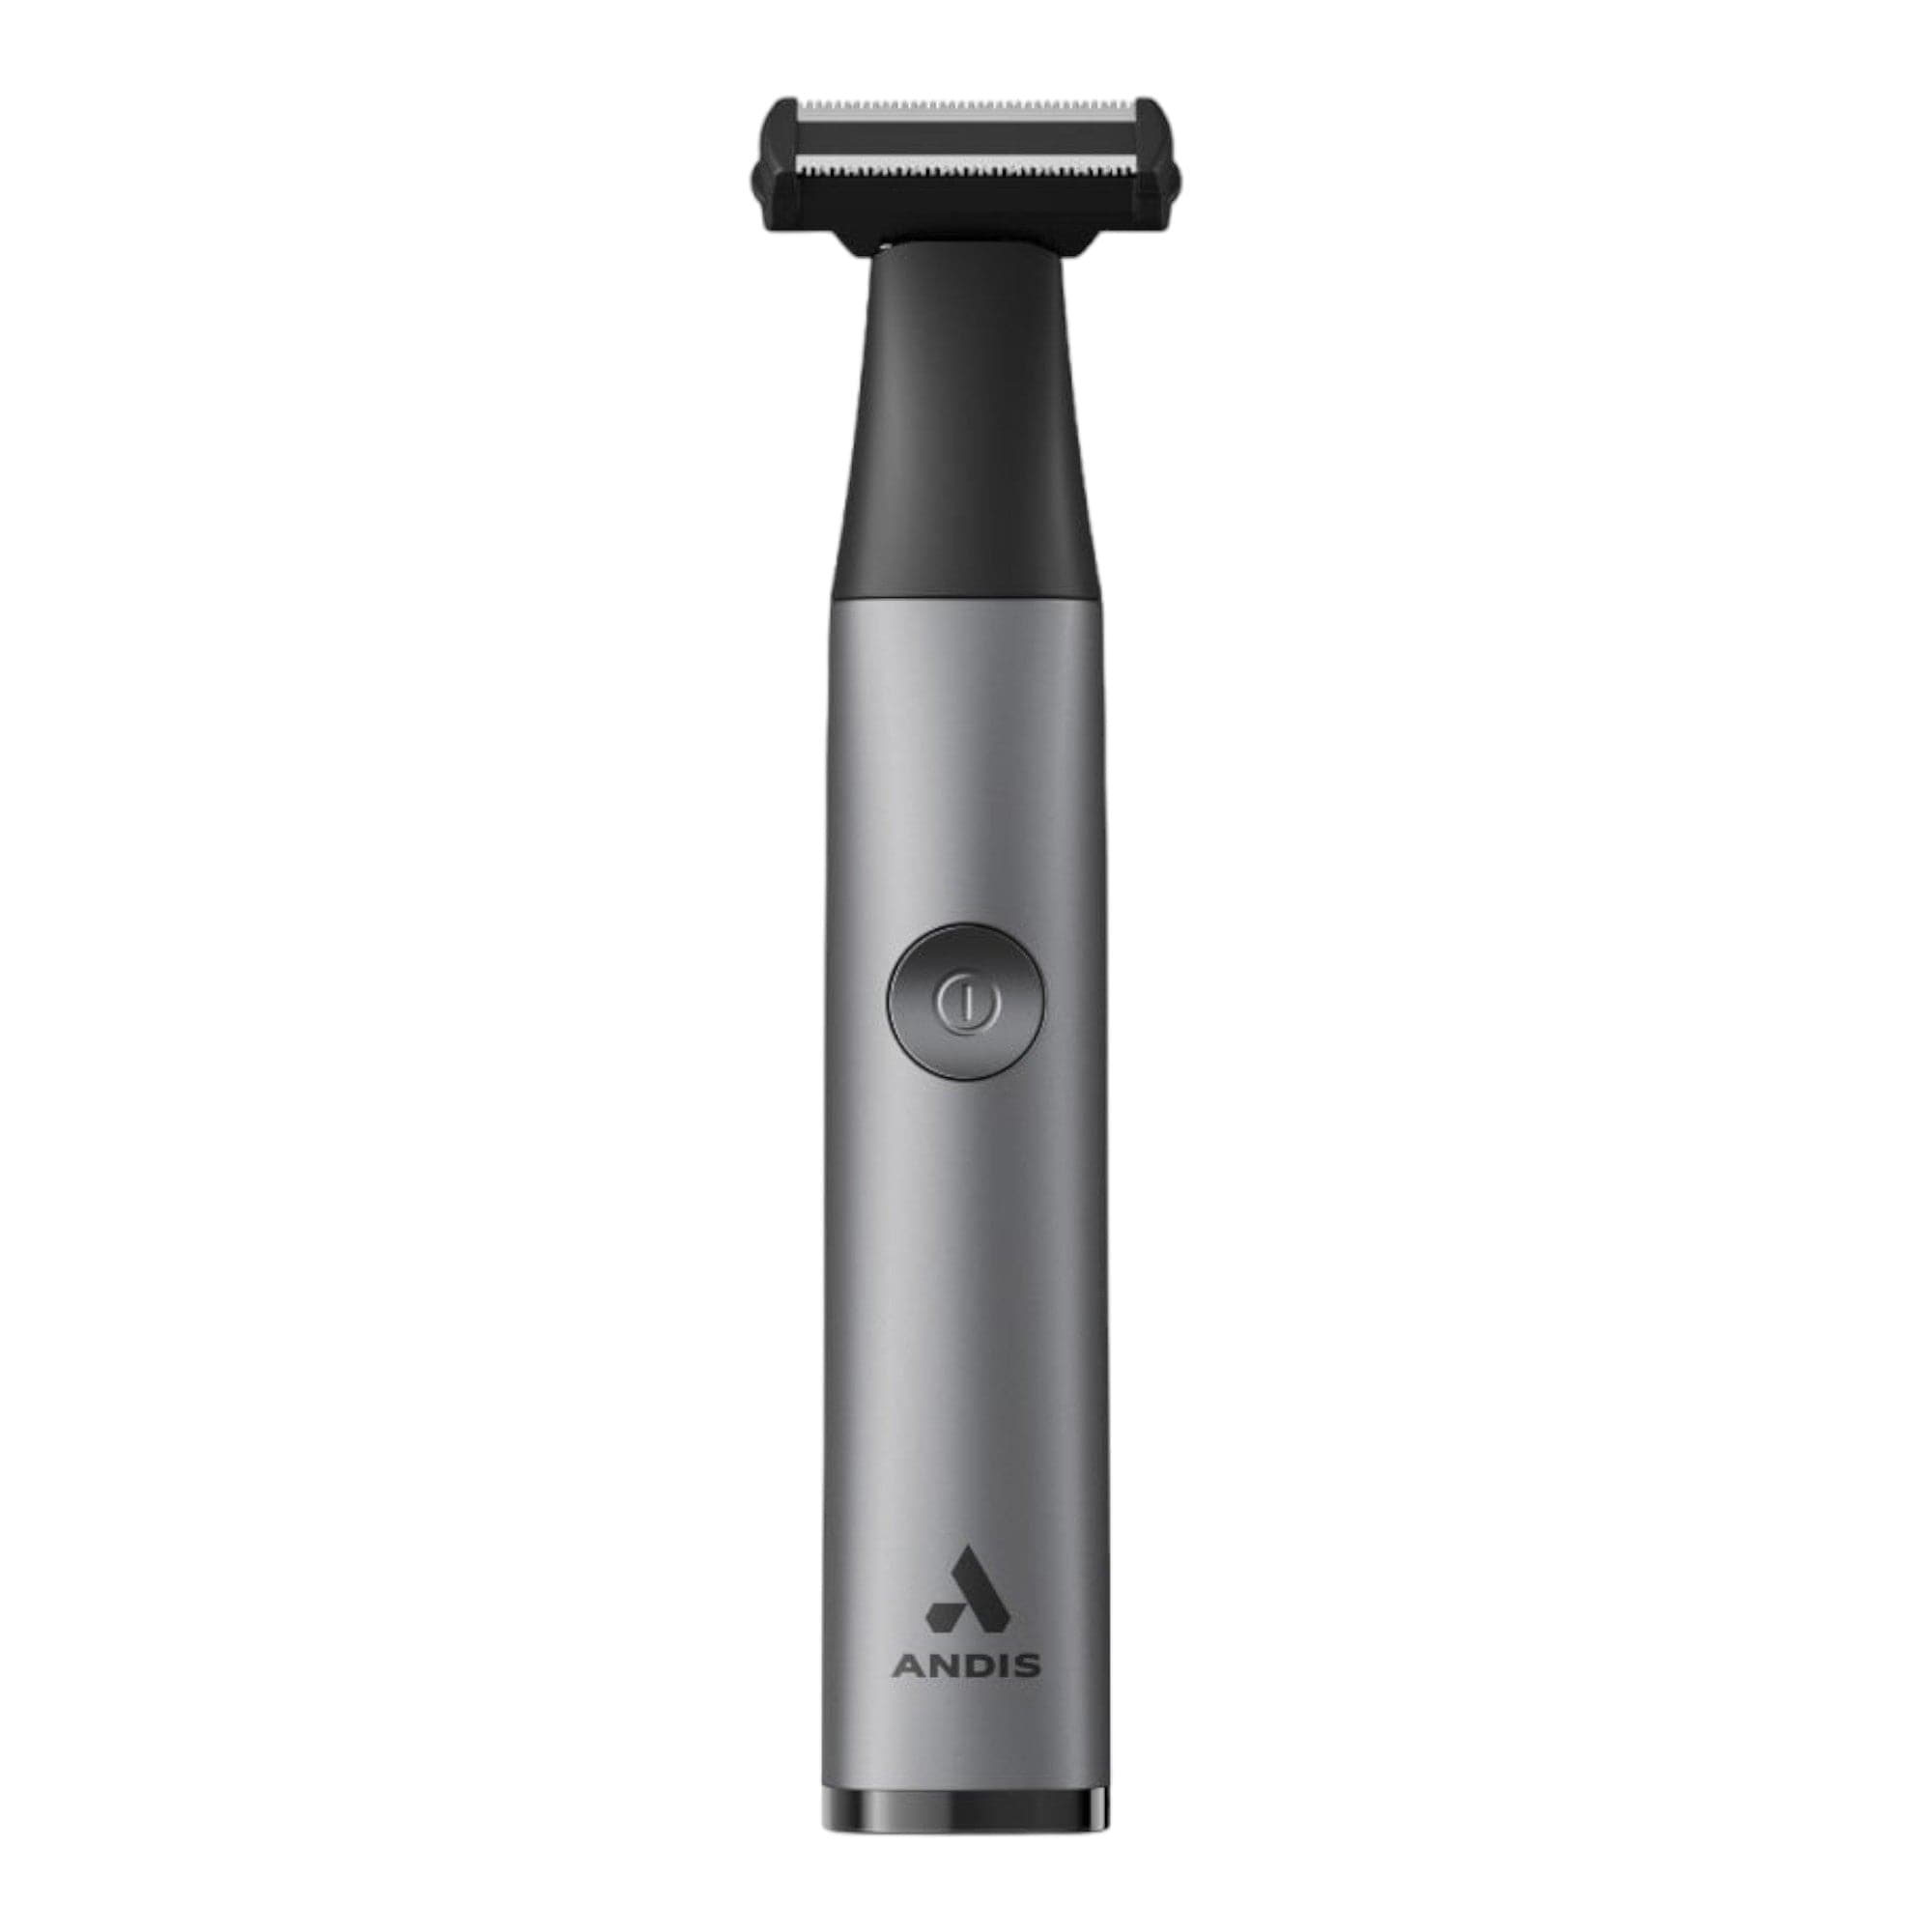 Andis - inEDGE Lithium-ion Cordless All-in-One Trimmer 560584